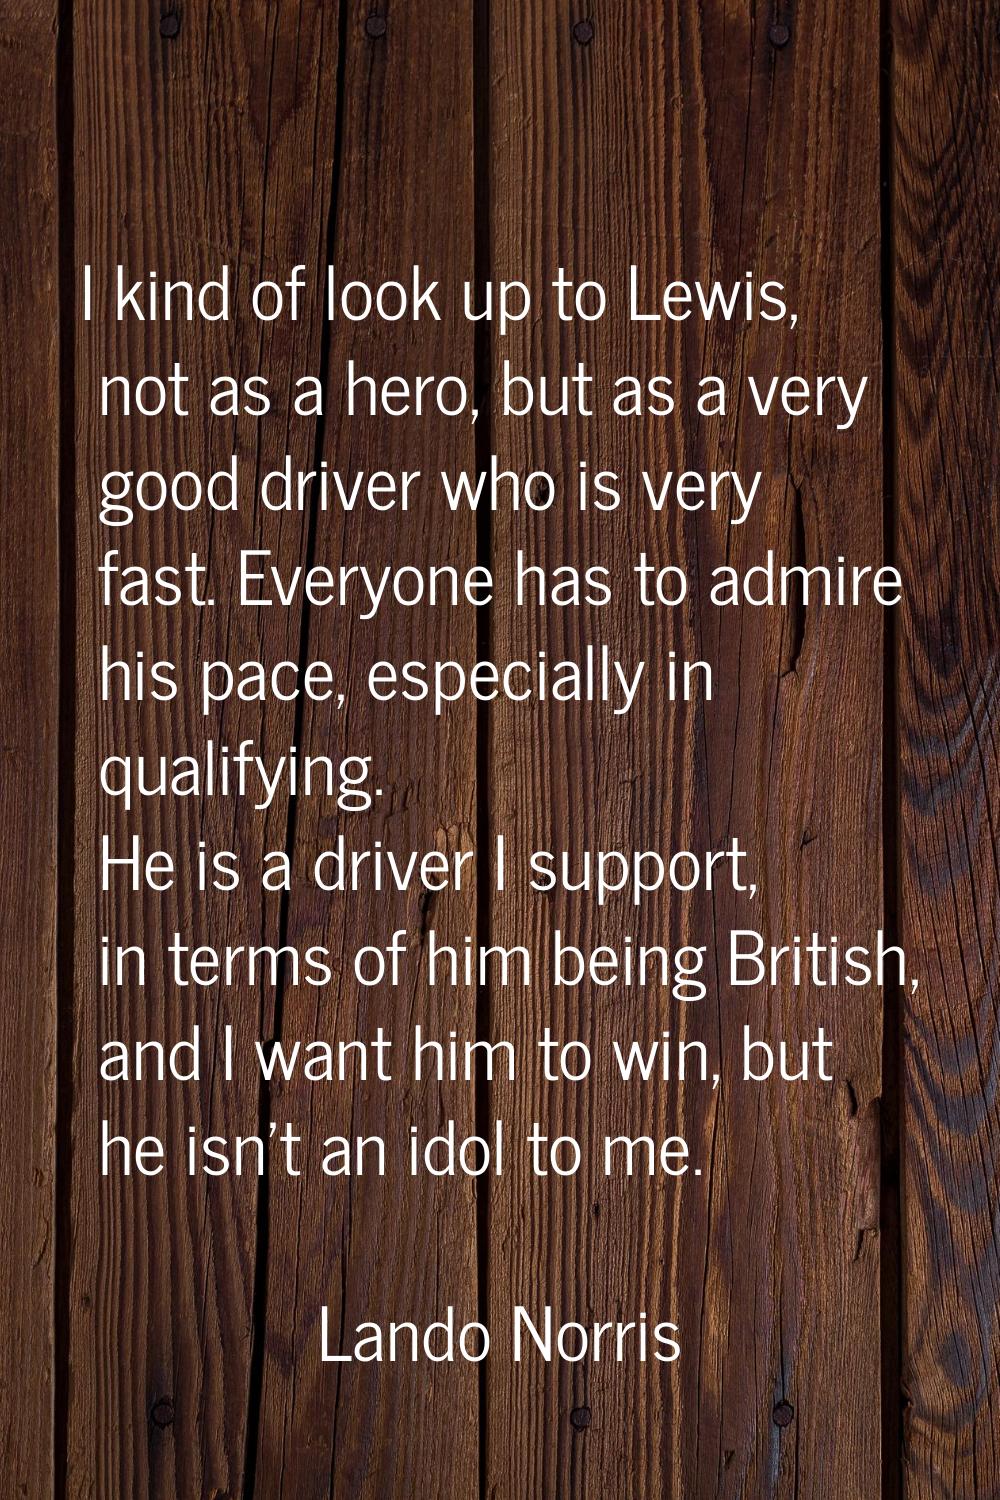 I kind of look up to Lewis, not as a hero, but as a very good driver who is very fast. Everyone has